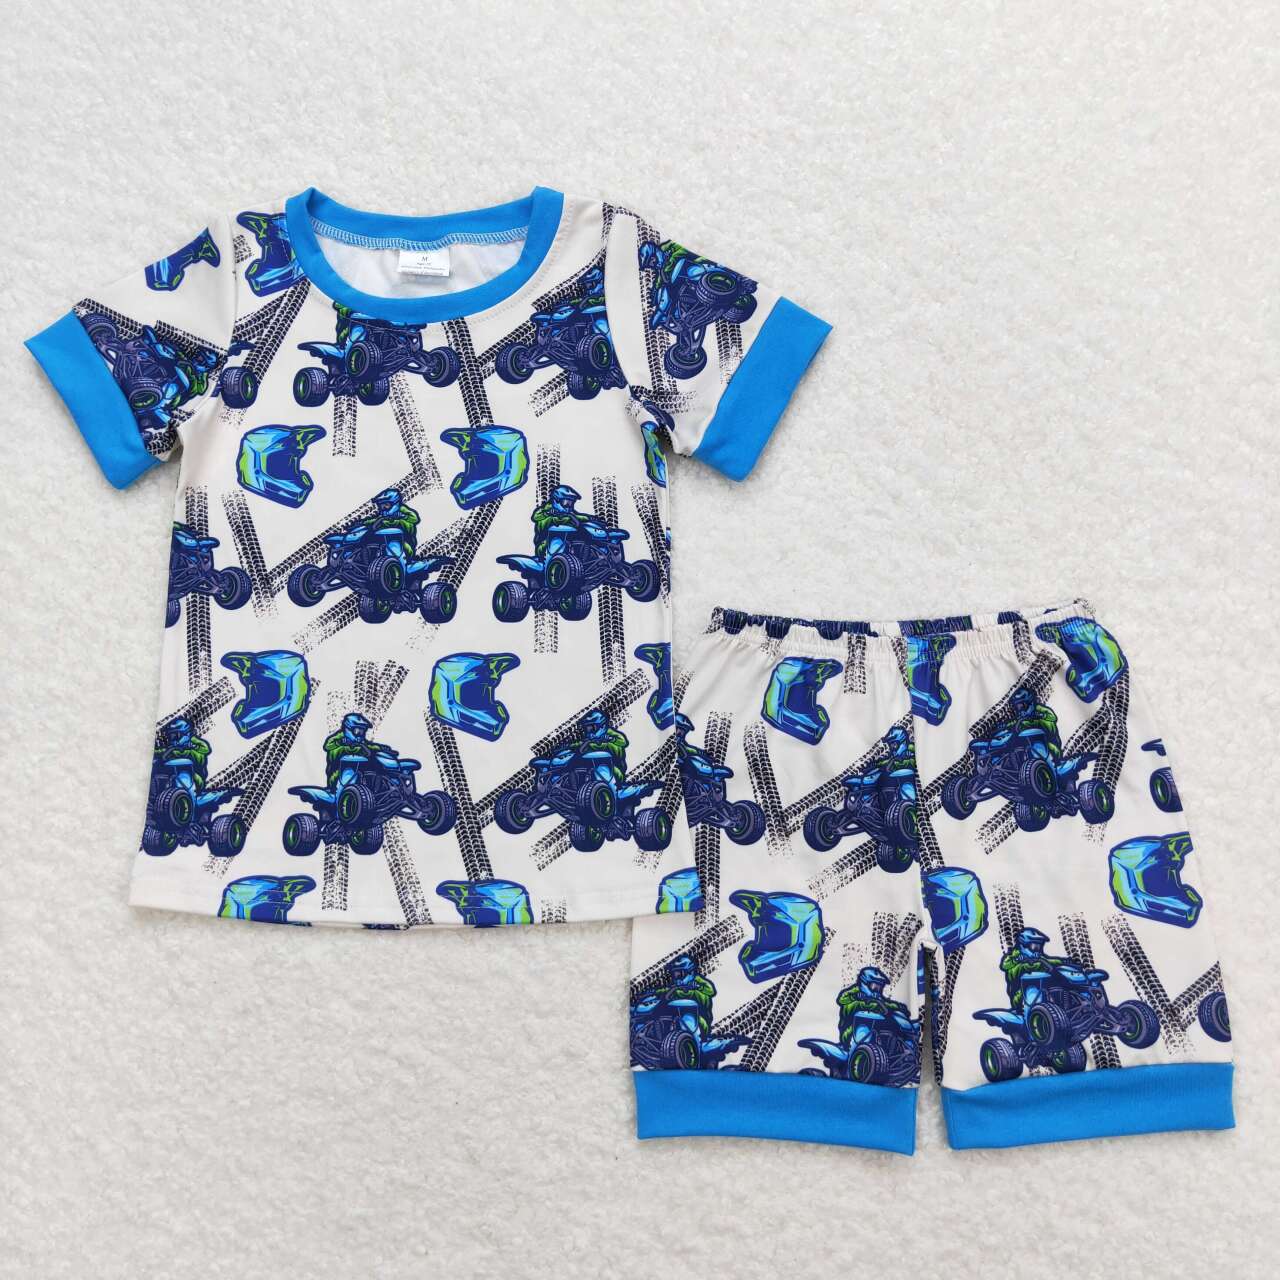 BSSO0775  Monster Truck Print Boys Summer Pajamas Clothes Set